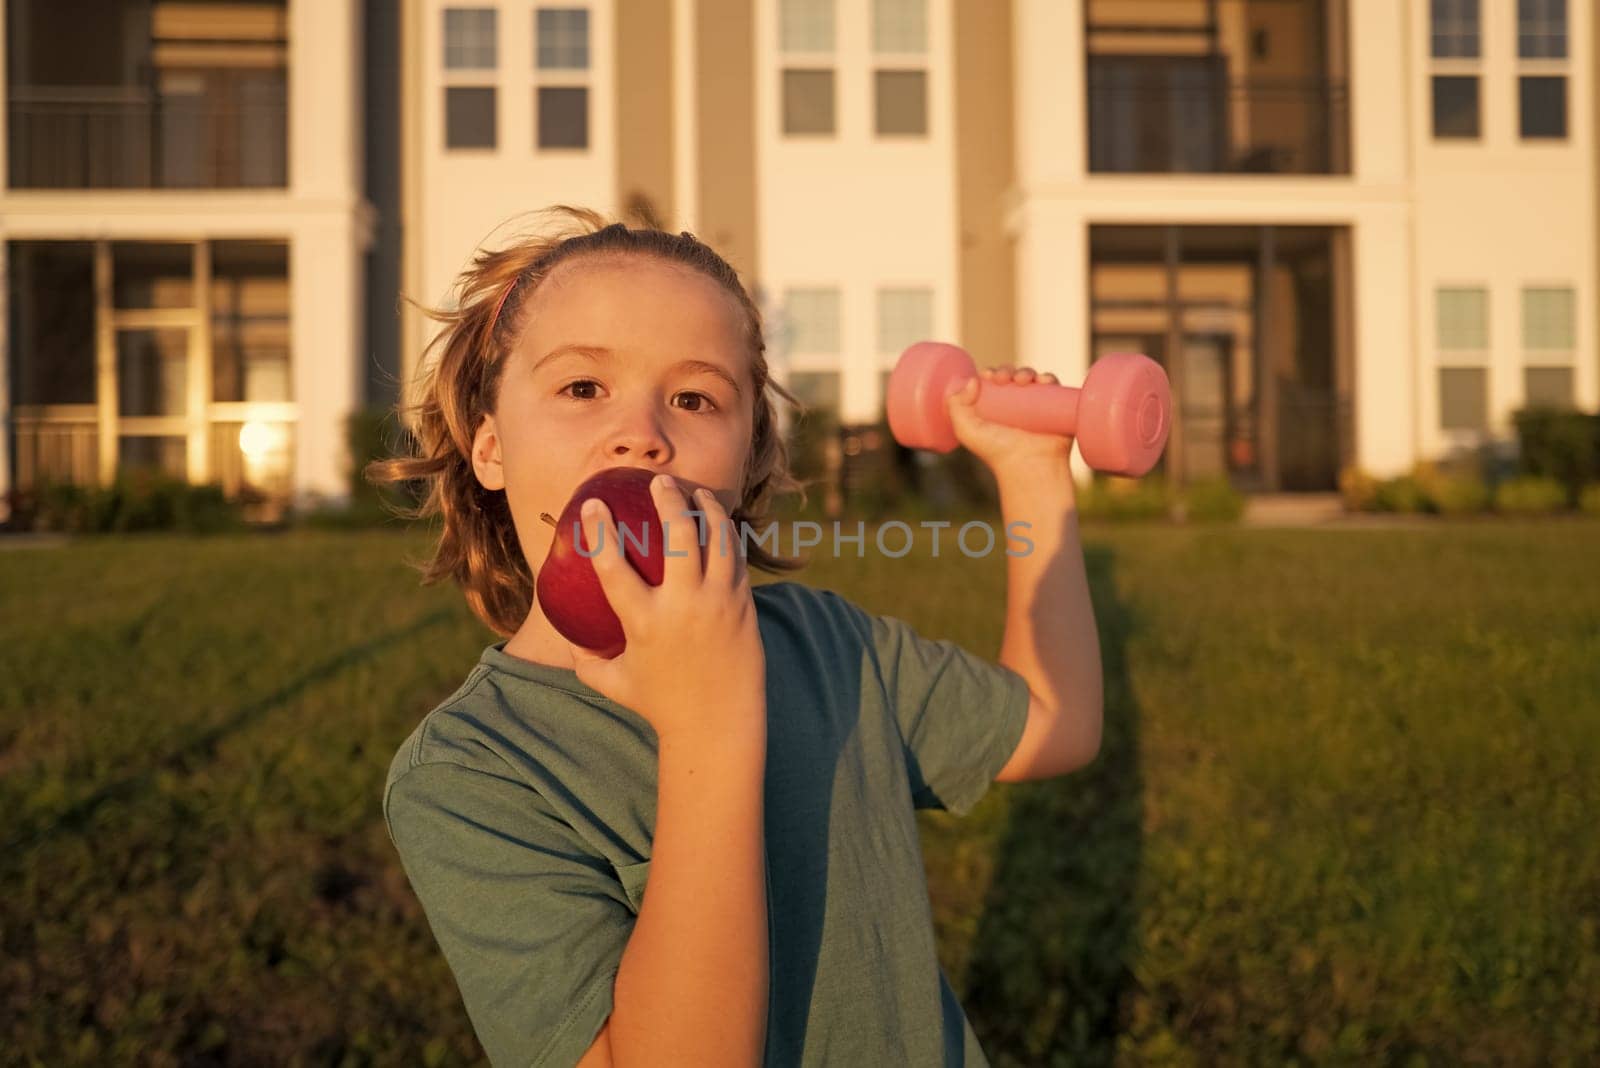 Kids sport training outdoor. Sport activities at leisure with children. Sporty kid boy holding dumbbells